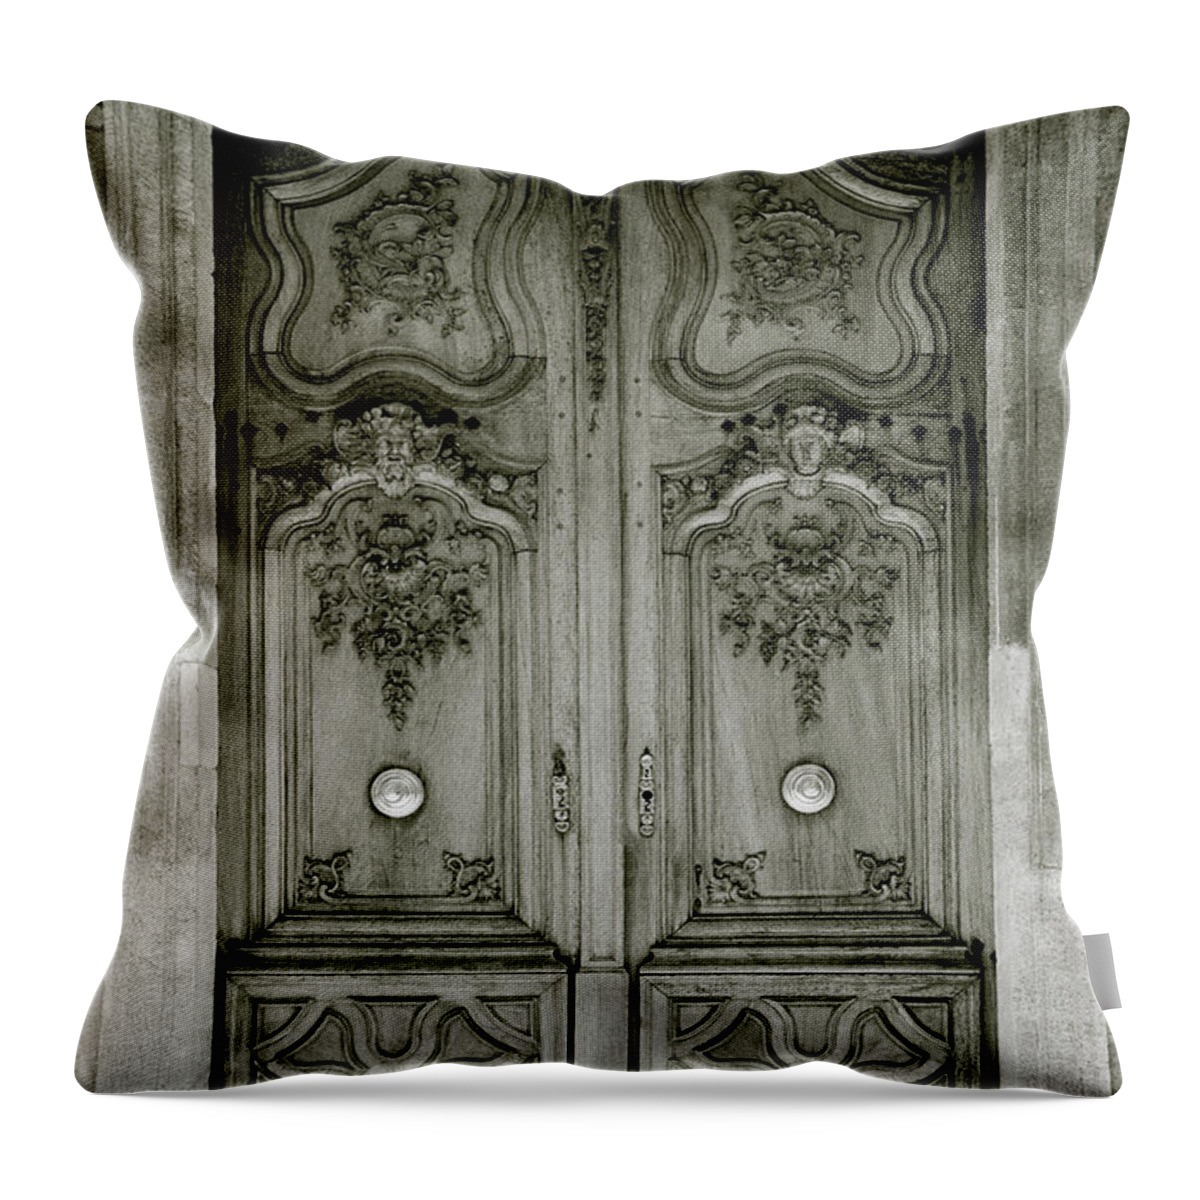 Aix Throw Pillow featuring the photograph Provence Door by Shaun Higson